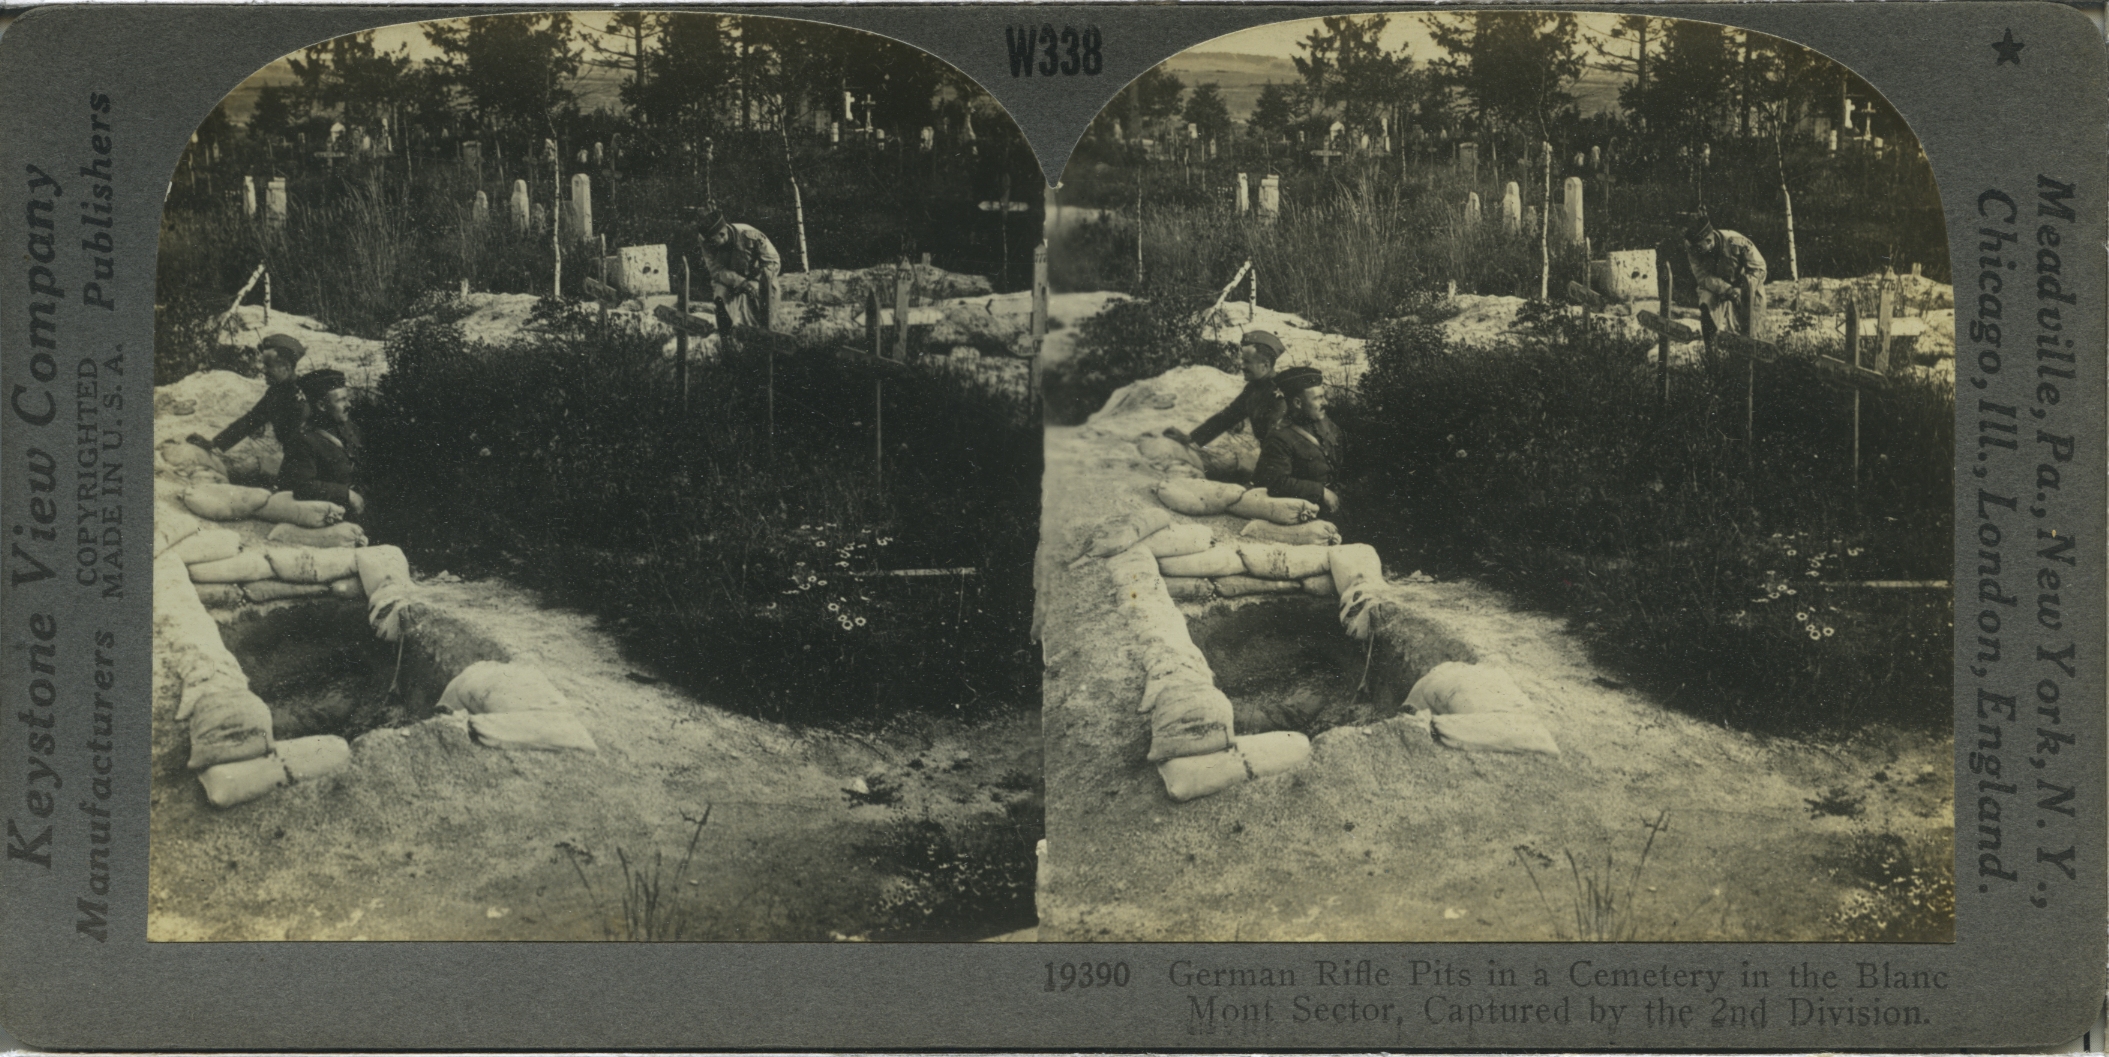 German Rifle Pits in a Cemetery in the Balnc Mont Sector, Captured by the 2nd Division